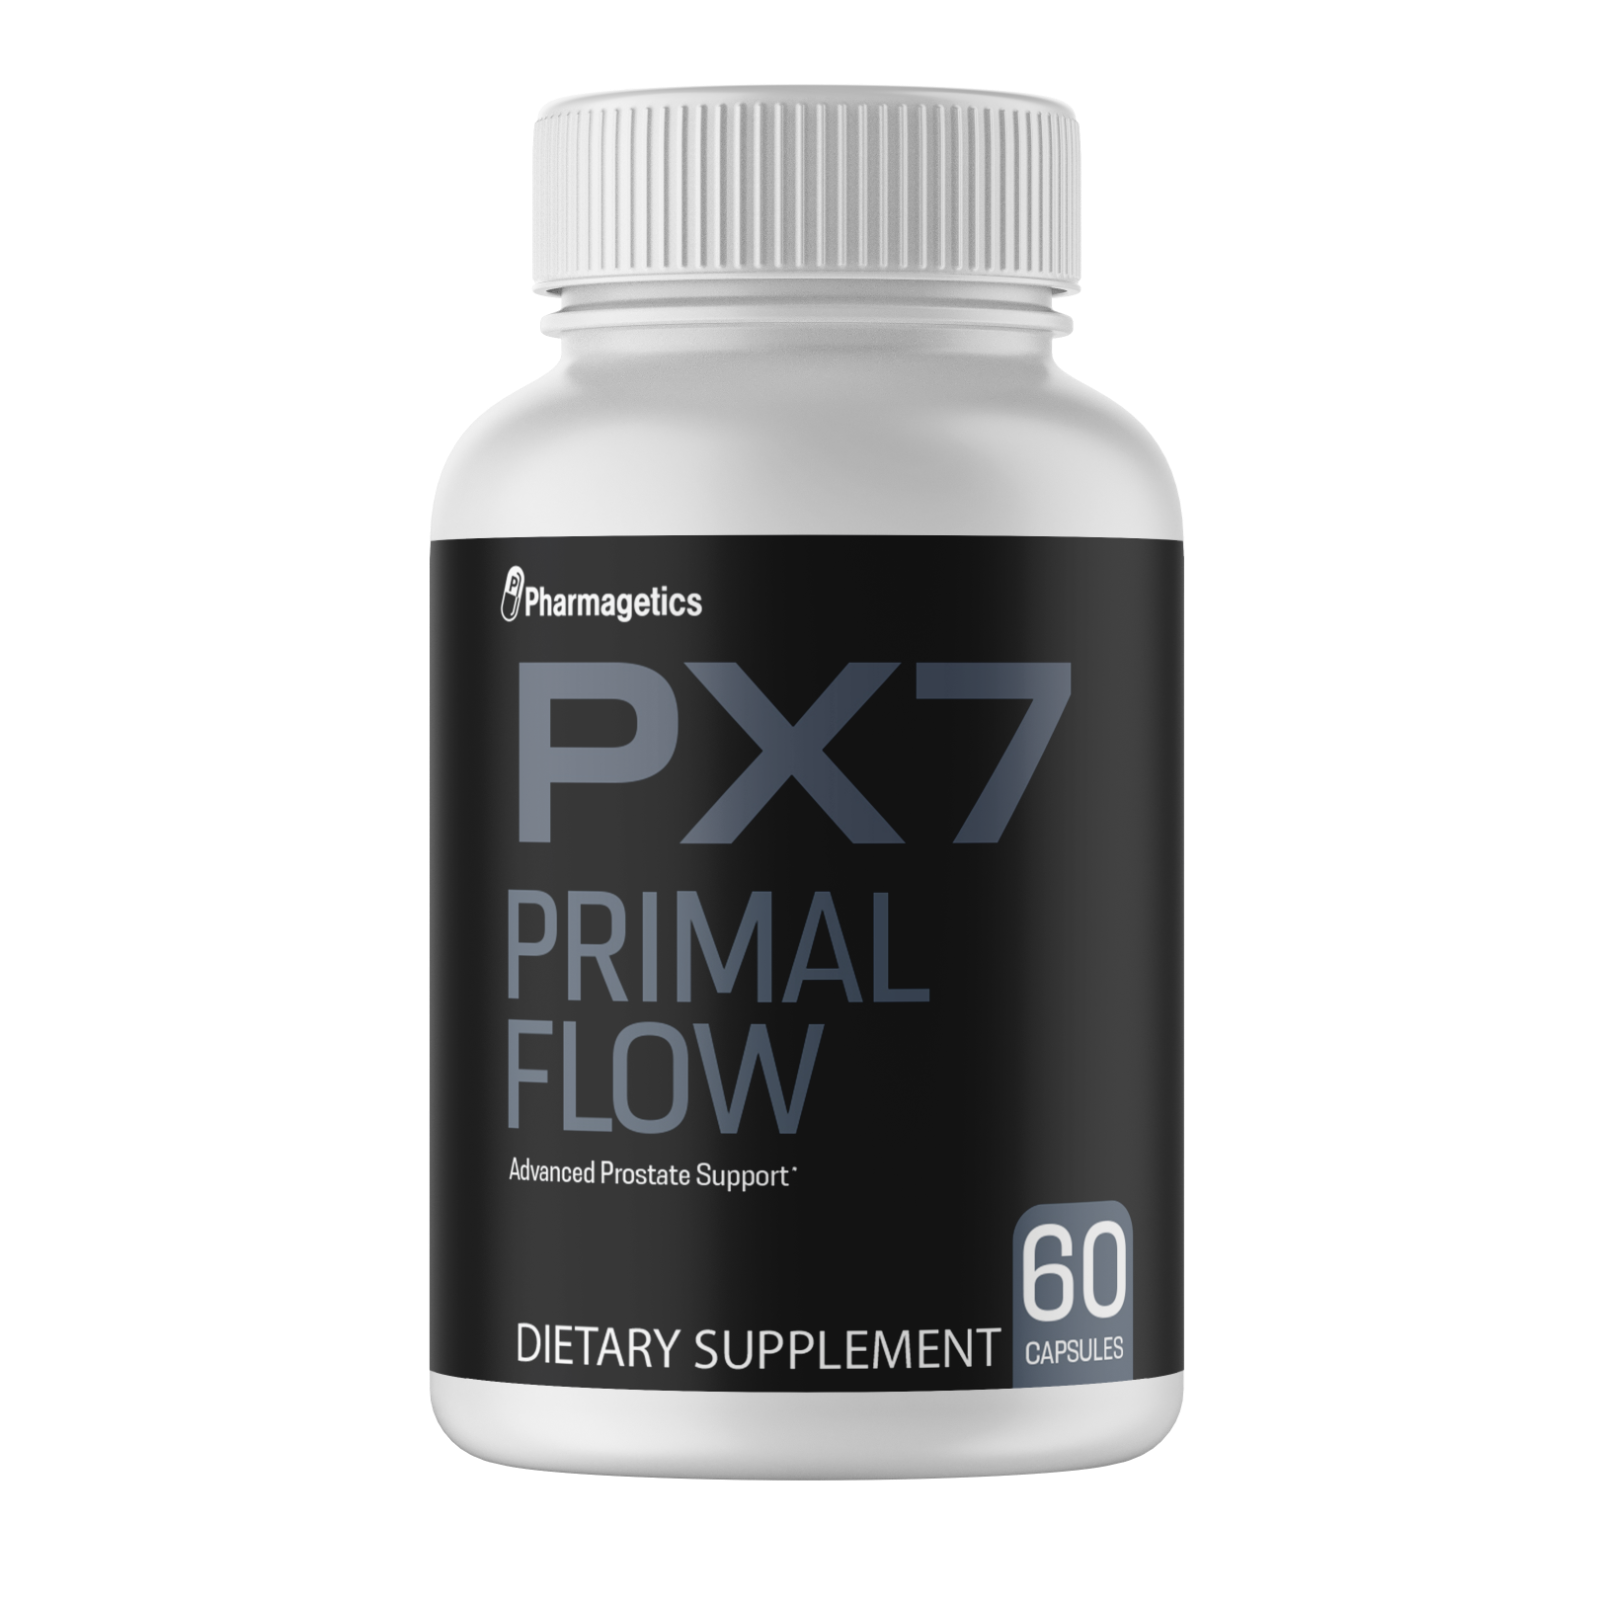 PX7 Primal Flow Advanced Prostate Support 60 Capsules